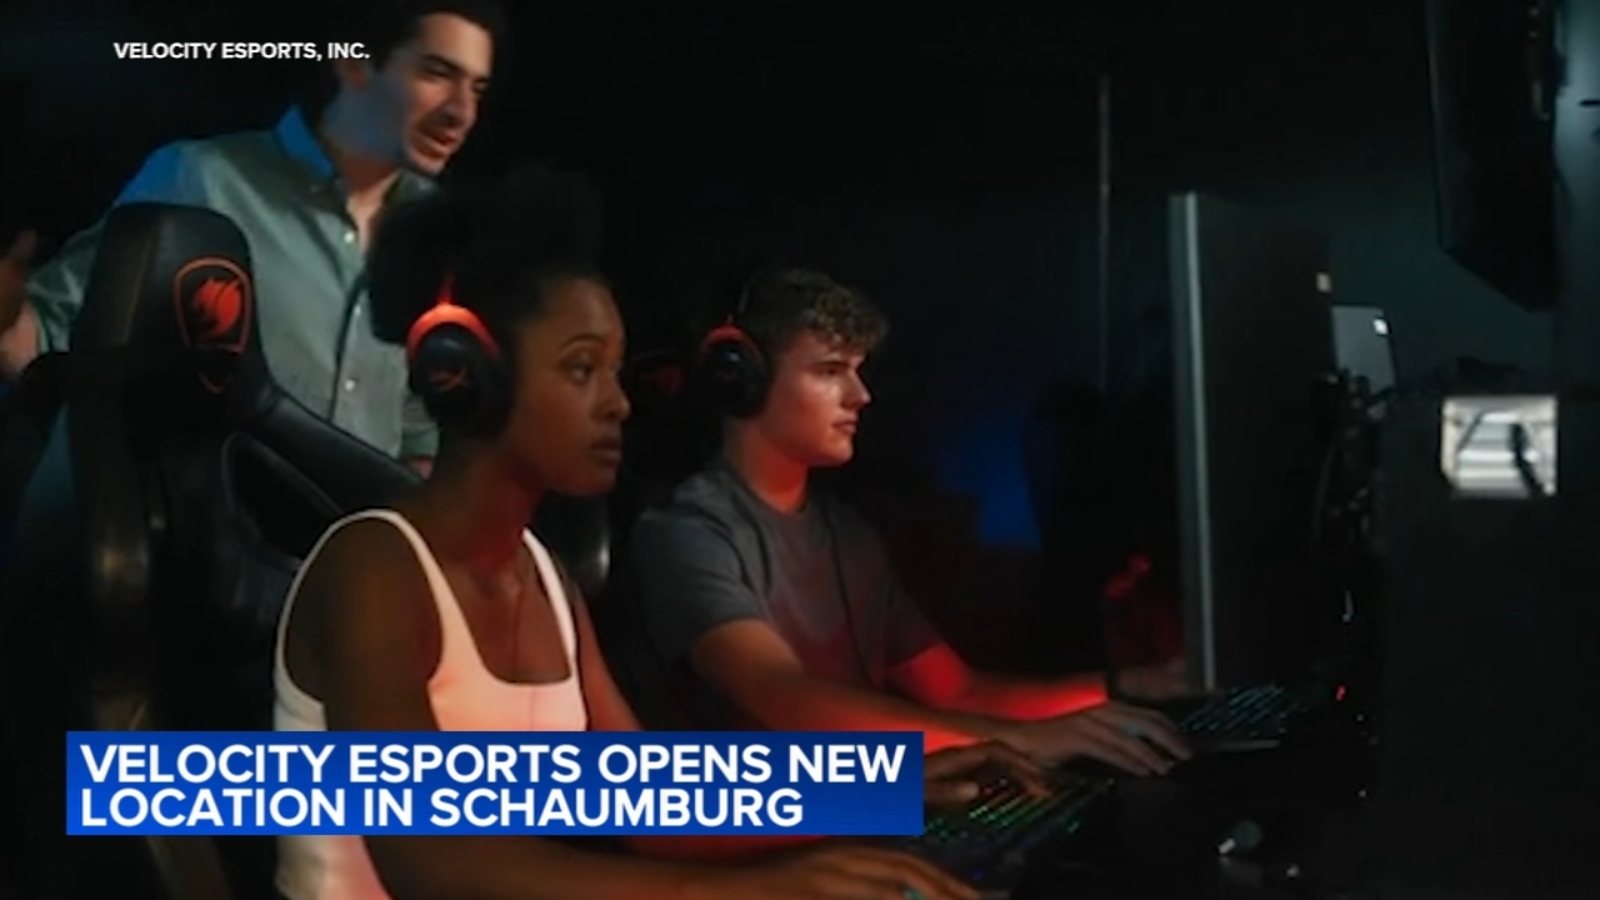 Velocity Esports offers next-level gaming, entertainment in Schaumburg [Video]